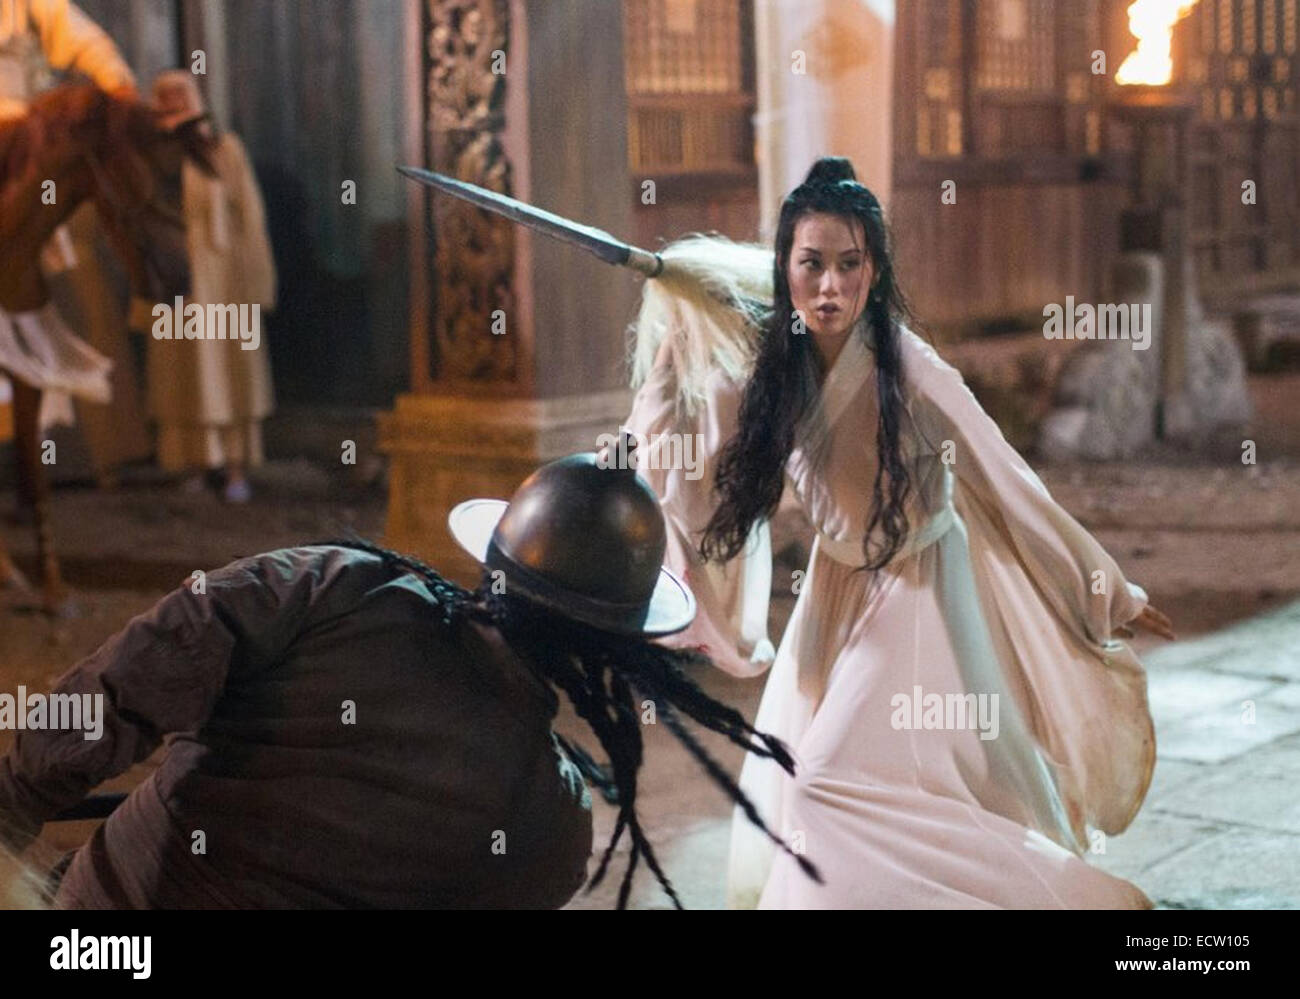 MARCO POLO 2014 Weinstein Company TV series with Olivia Cheng Stock Photo